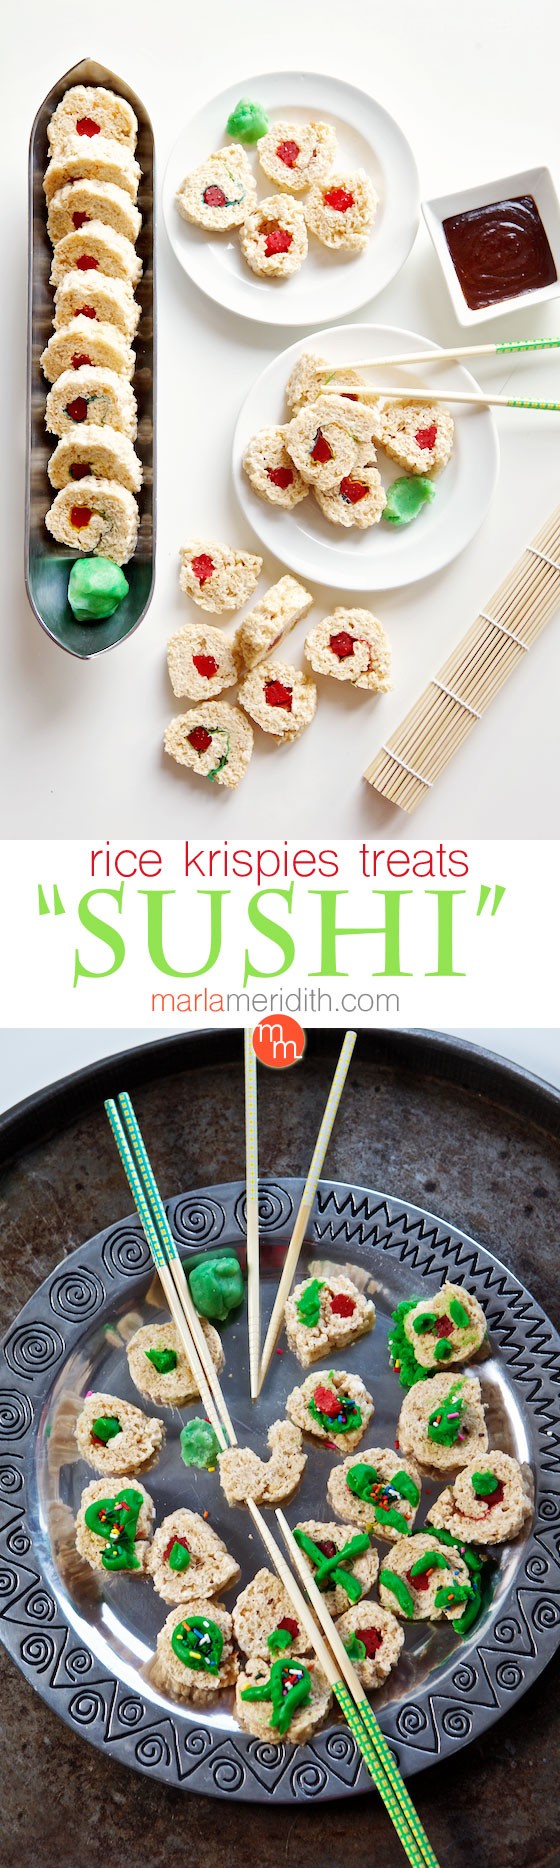 Rice Krispies Treats "Sushi" | Kids & adults will have so much fun with this dessert "sushi" | MarlaMeridith.com ( @marlameridith )